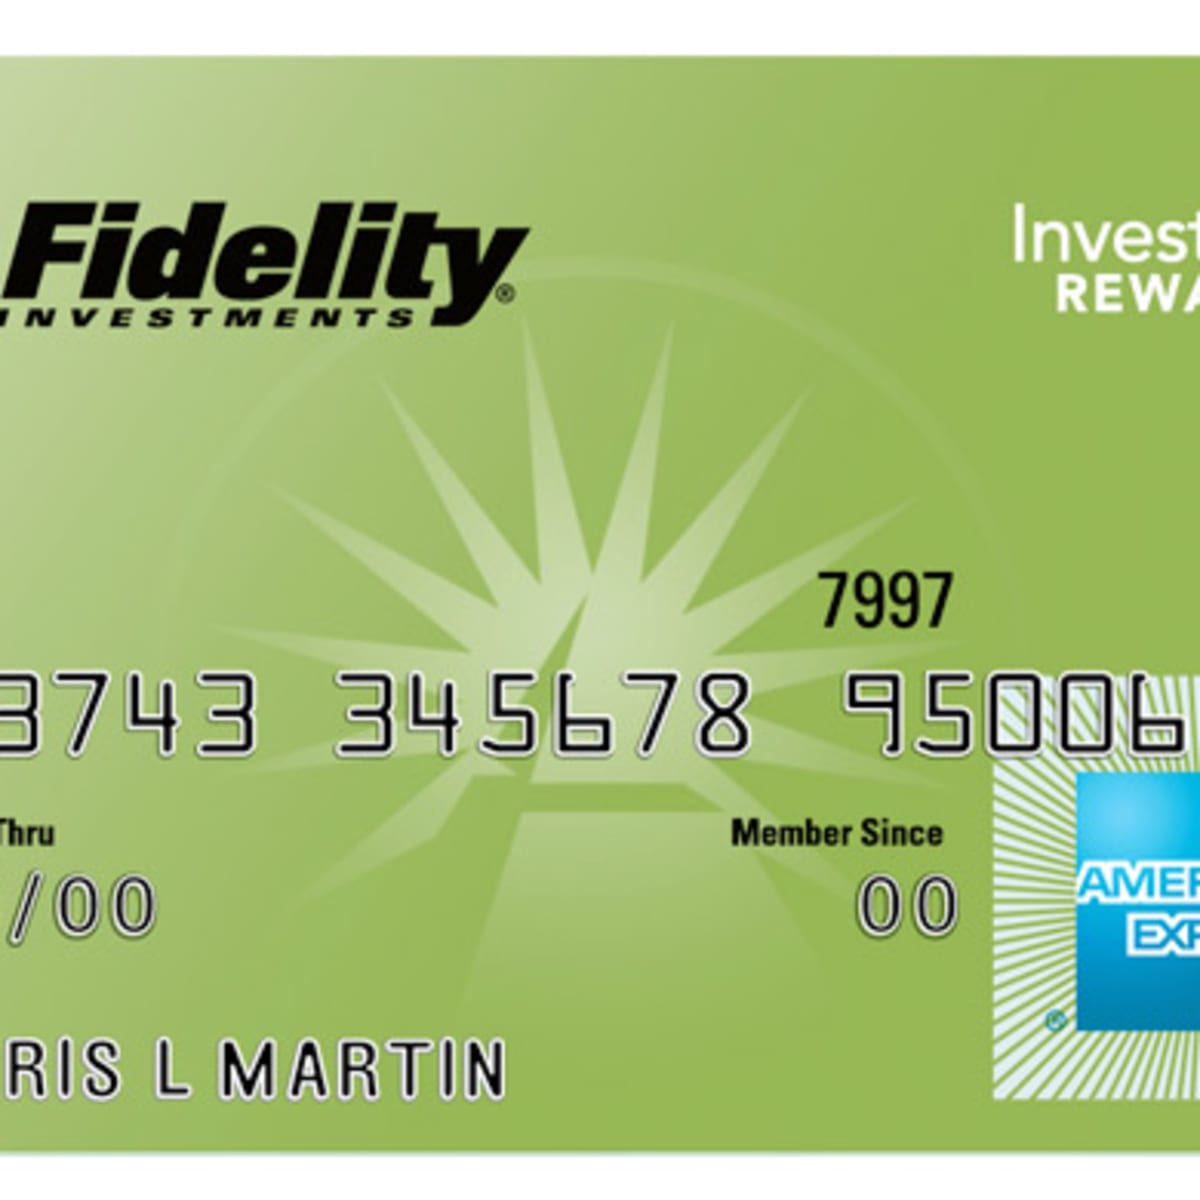 Amex Axp Loses Fidelity Deal As Branded Credit Card Rivalry Heats Up Thestreet